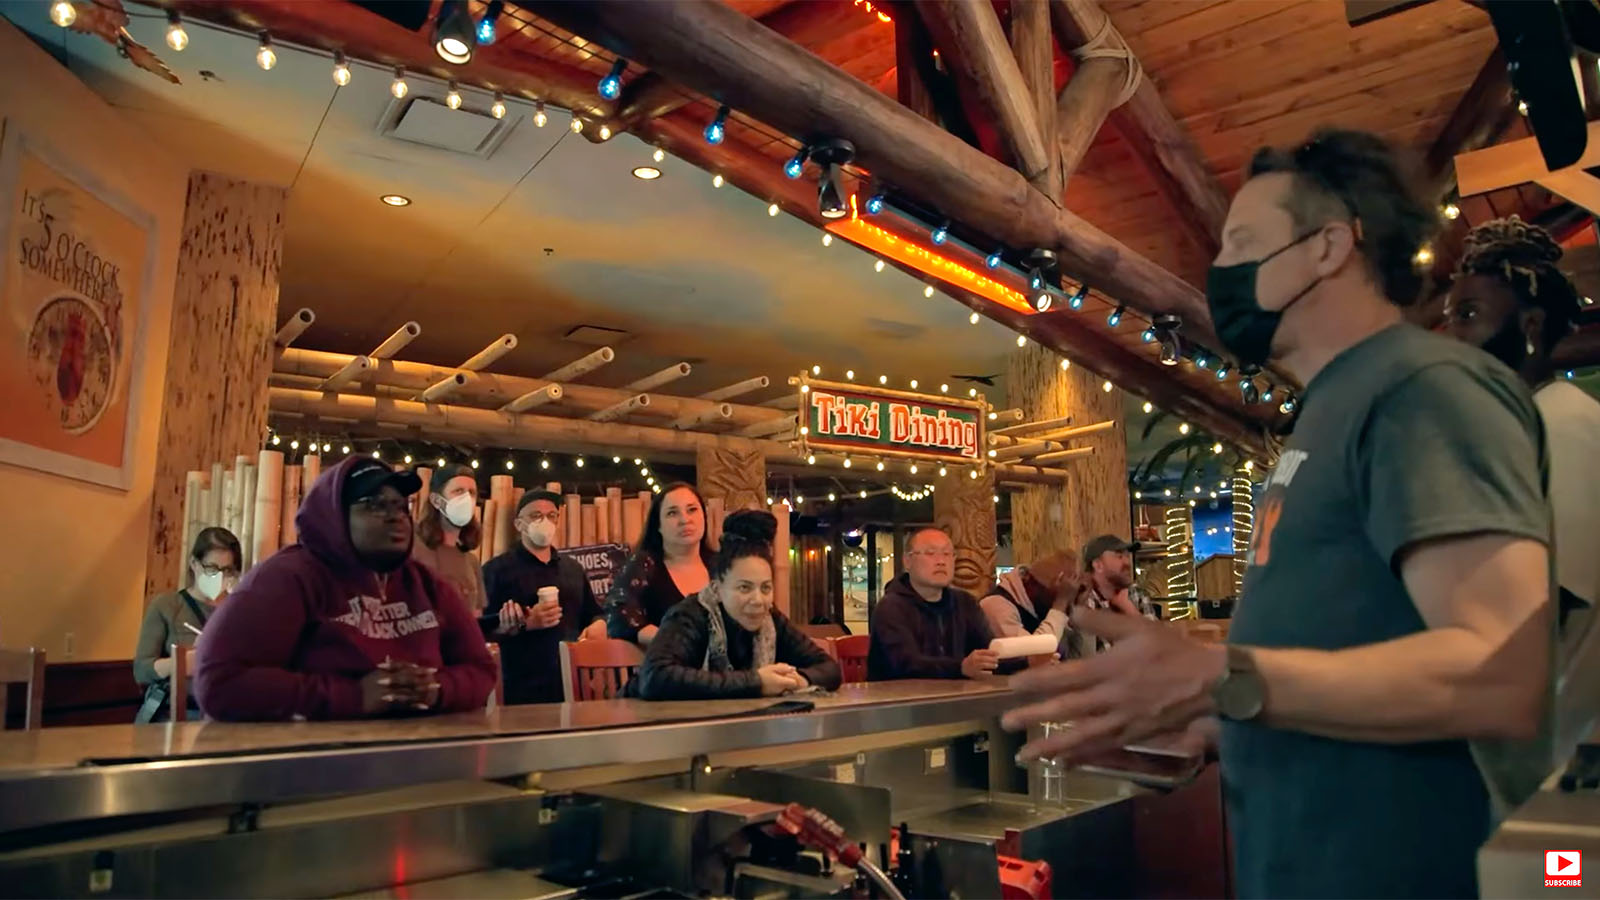 Off-site shoots, like the Margaritaville episdeo had to be meticulously organized. Image © Amazon Prime Video